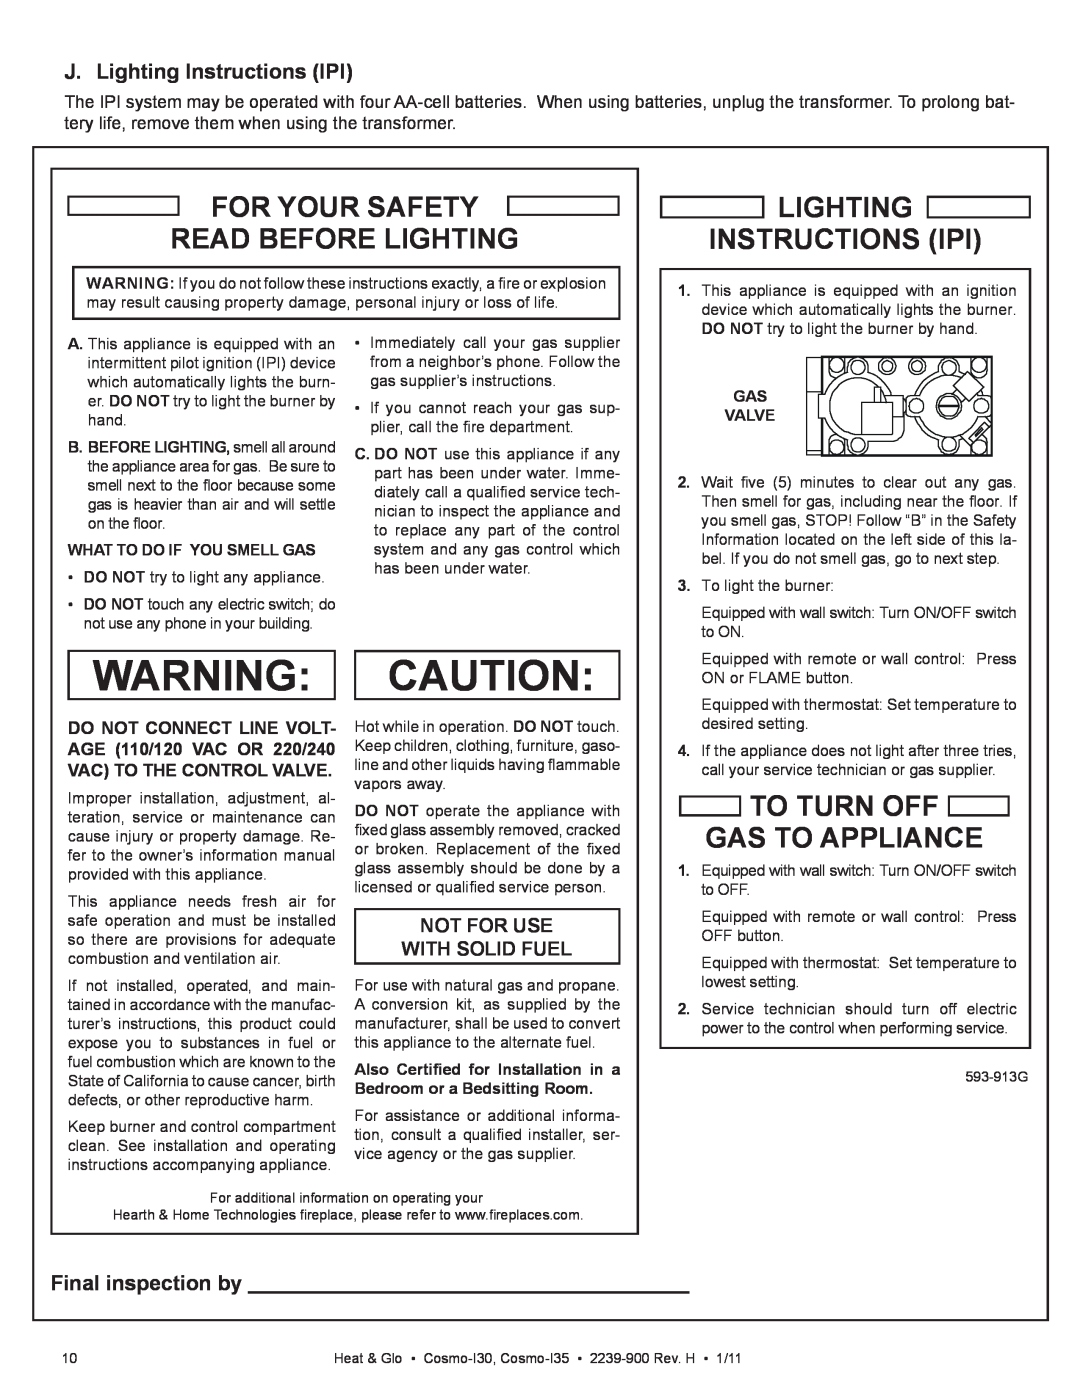 Heat & Glo LifeStyle Cosmo-130 J. Lighting Instructions IPI, Final inspection by, For Your Safety Read Before Lighting 